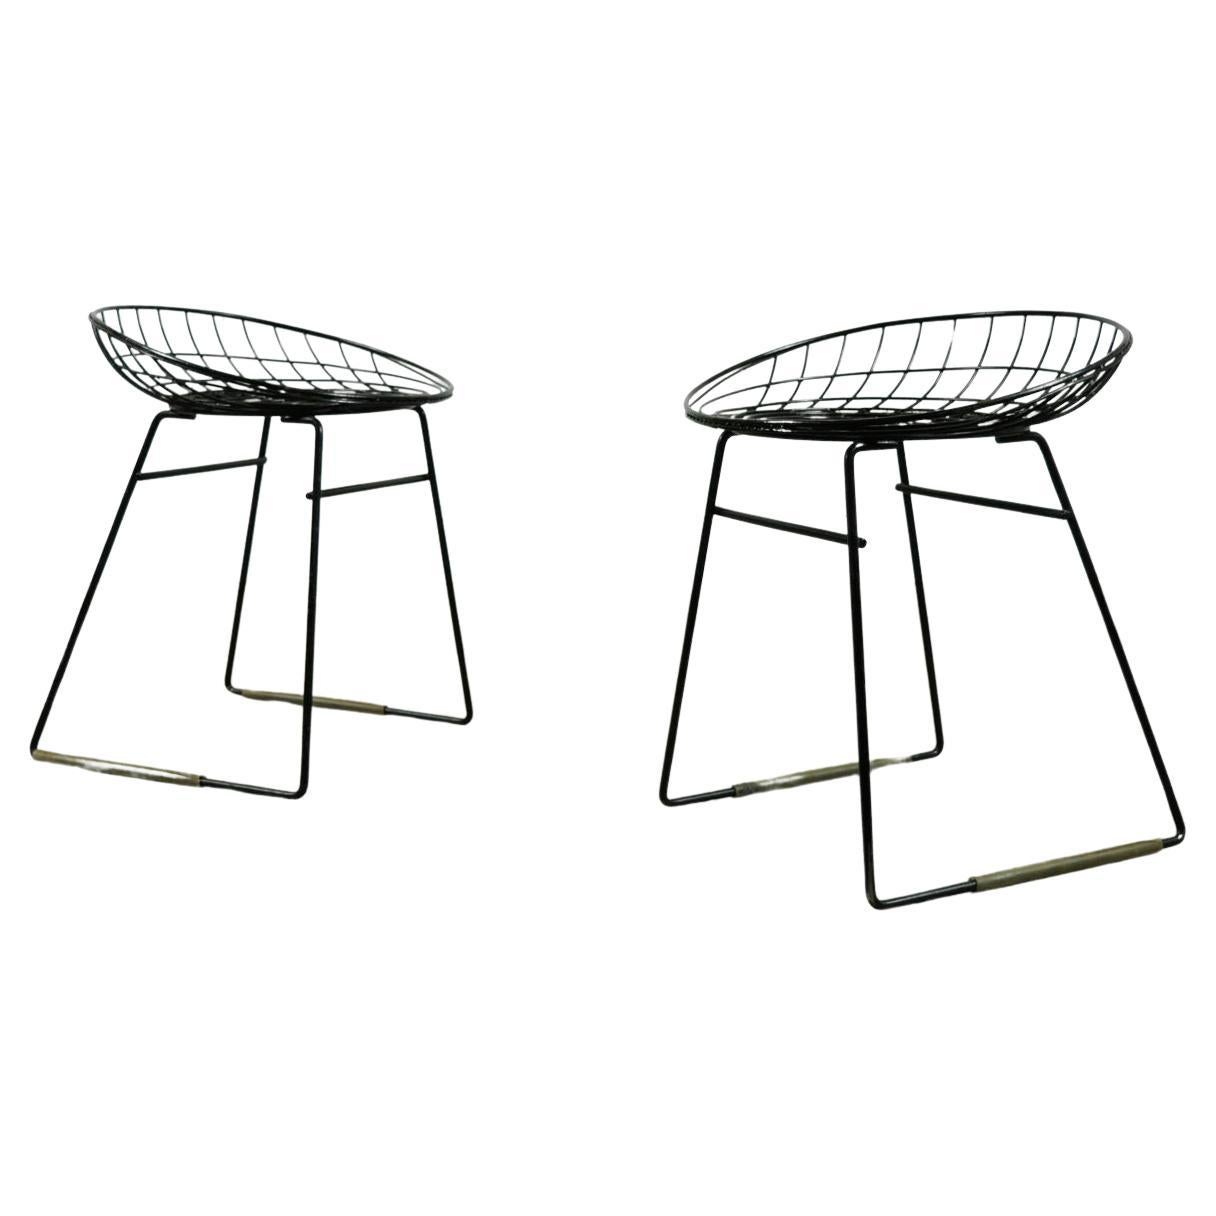 Set of two metal wire stools KM05 designed by Cees Braakman for Pastoe, 1950s For Sale